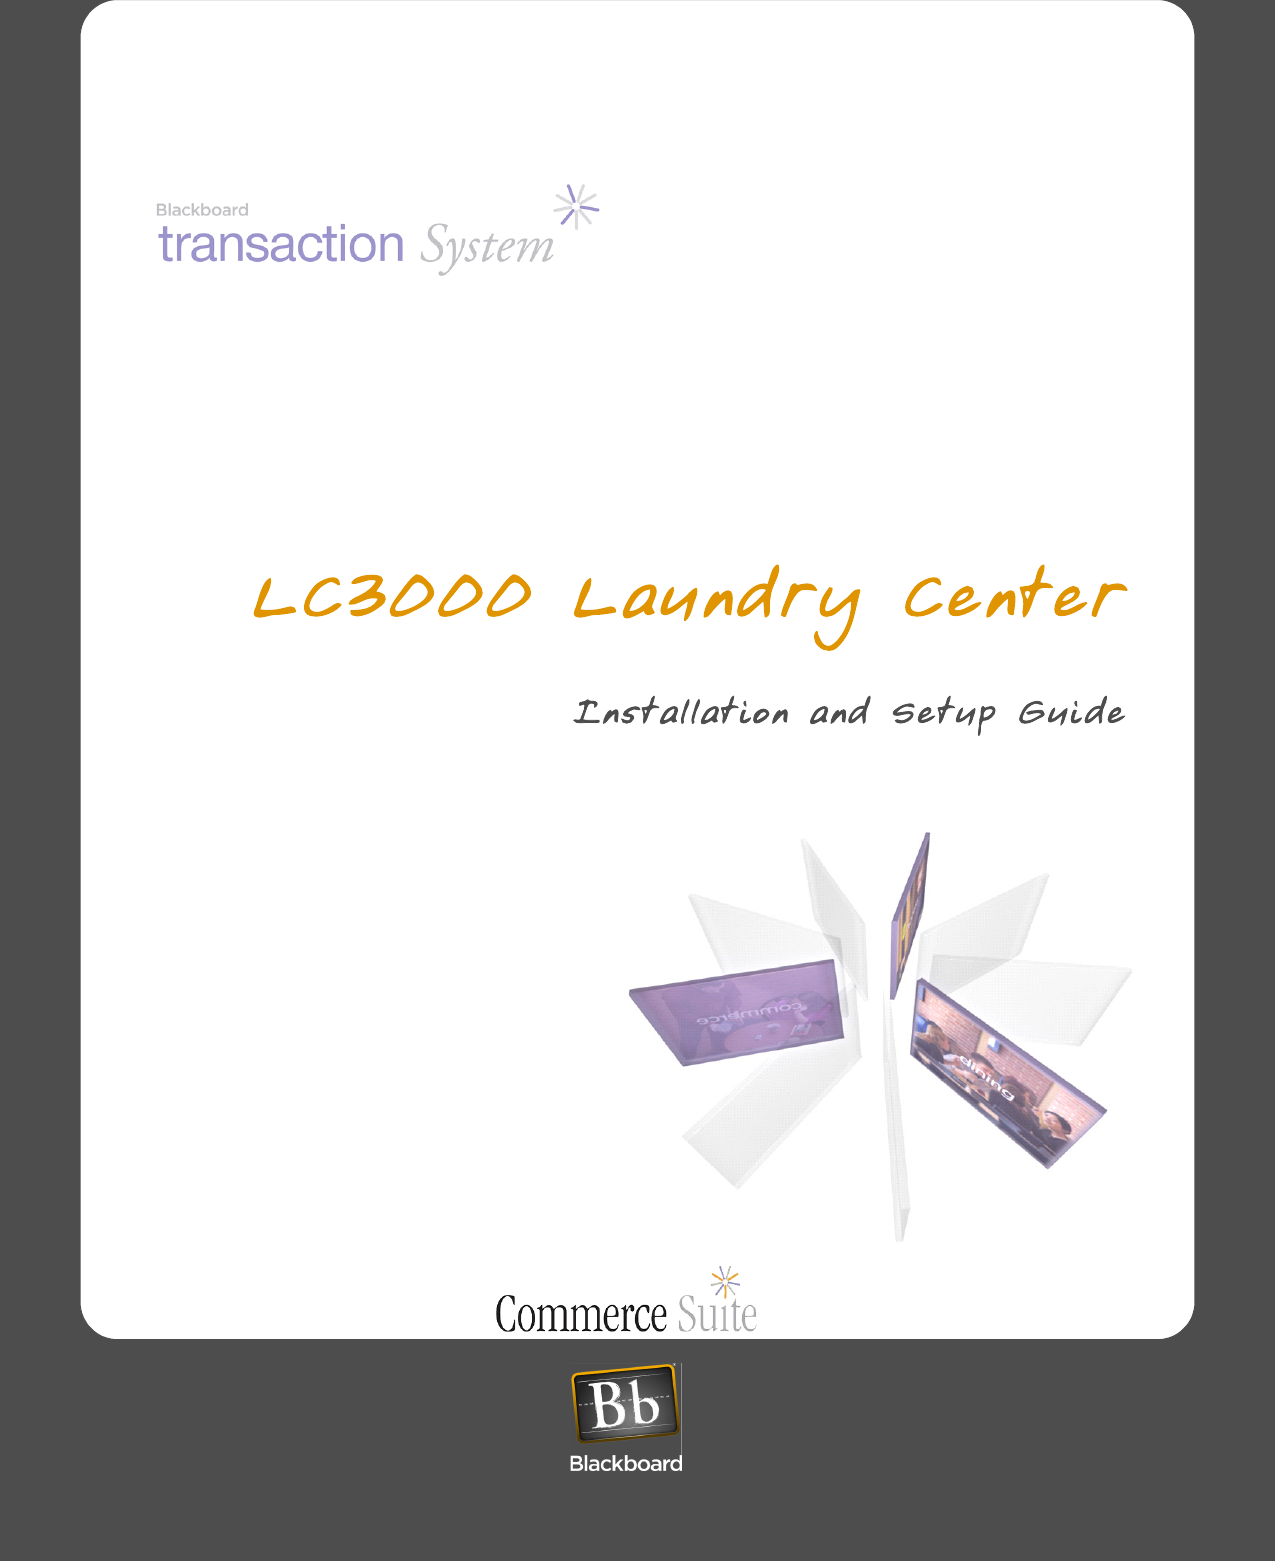 LC3000 Laundry CenterInstallation and Setup Guide